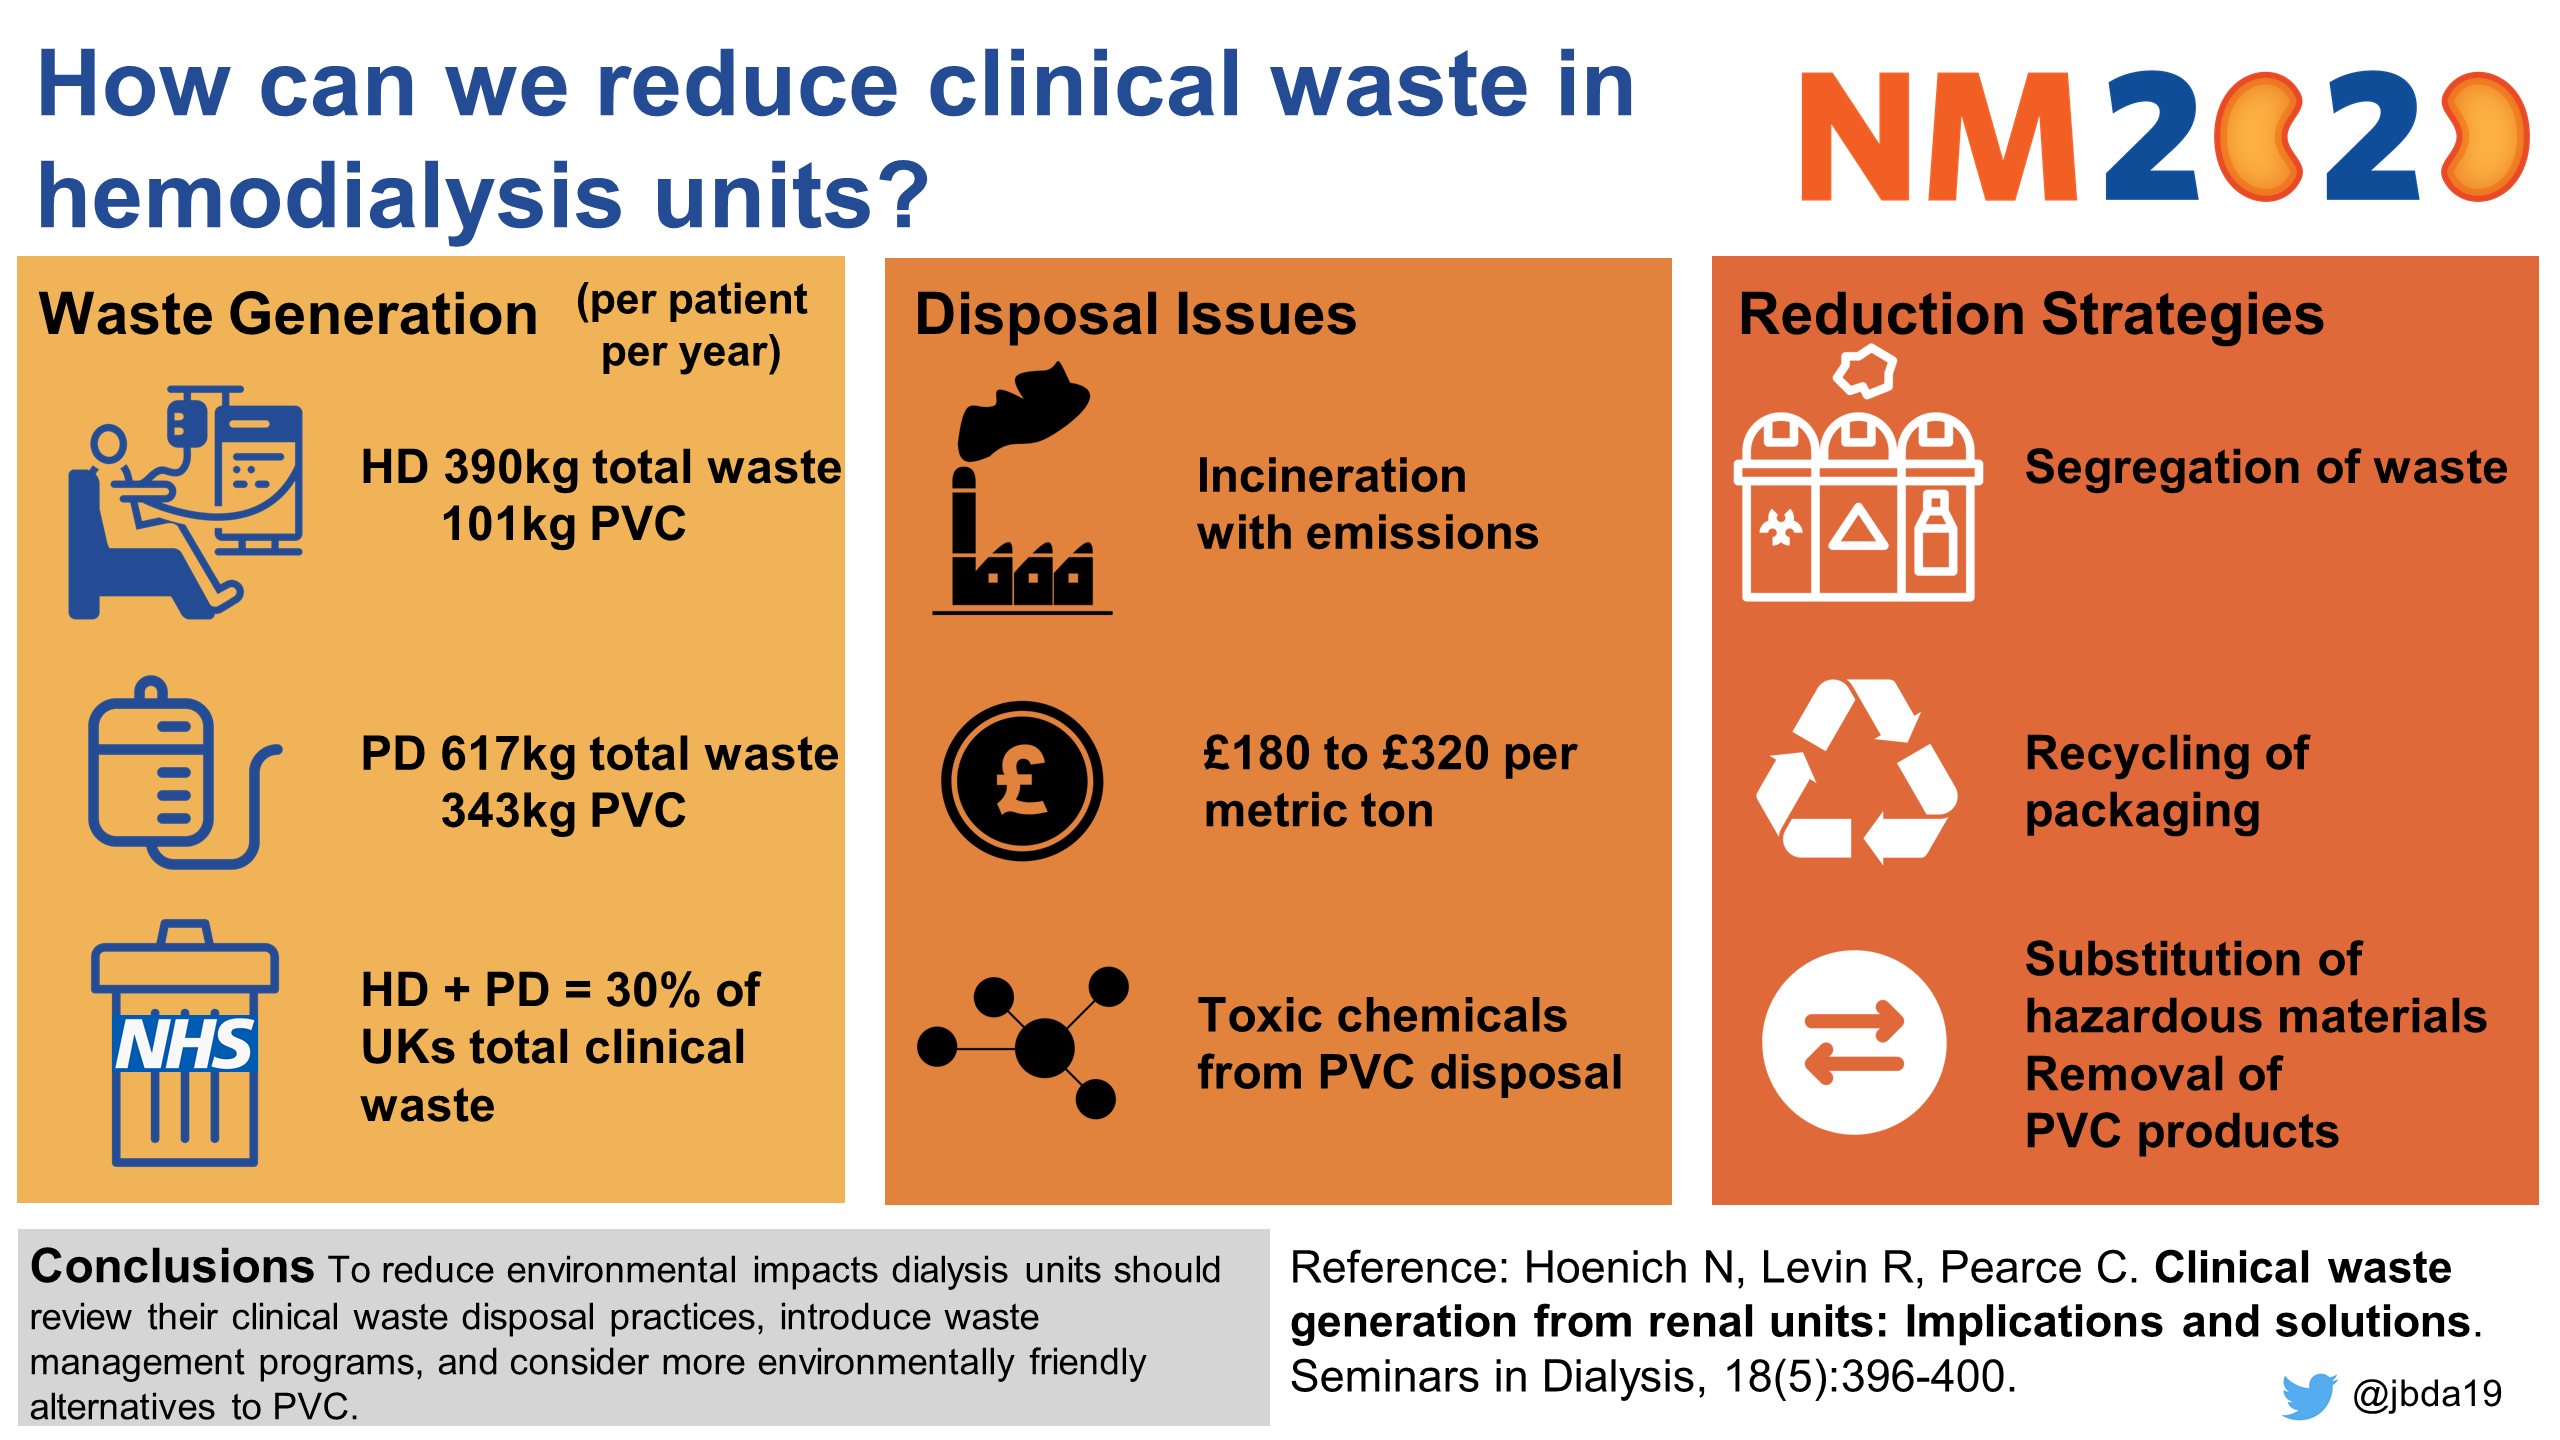 How Can Dialysis Waste Be Reduced While Maintaining Kidney Care Sustainability?